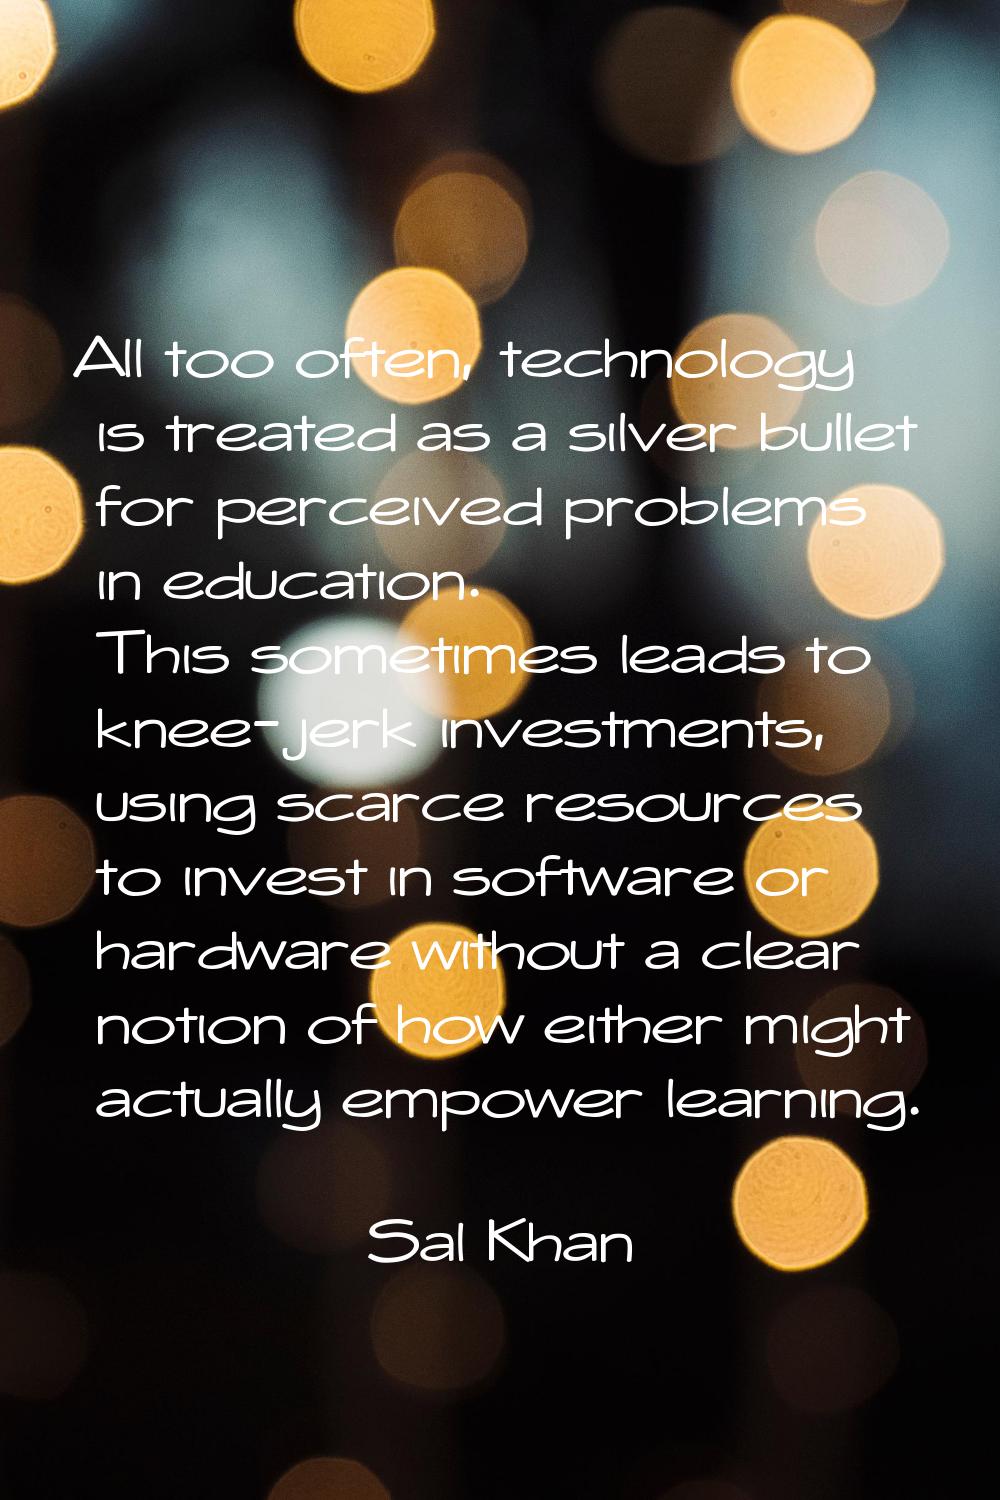 All too often, technology is treated as a silver bullet for perceived problems in education. This s